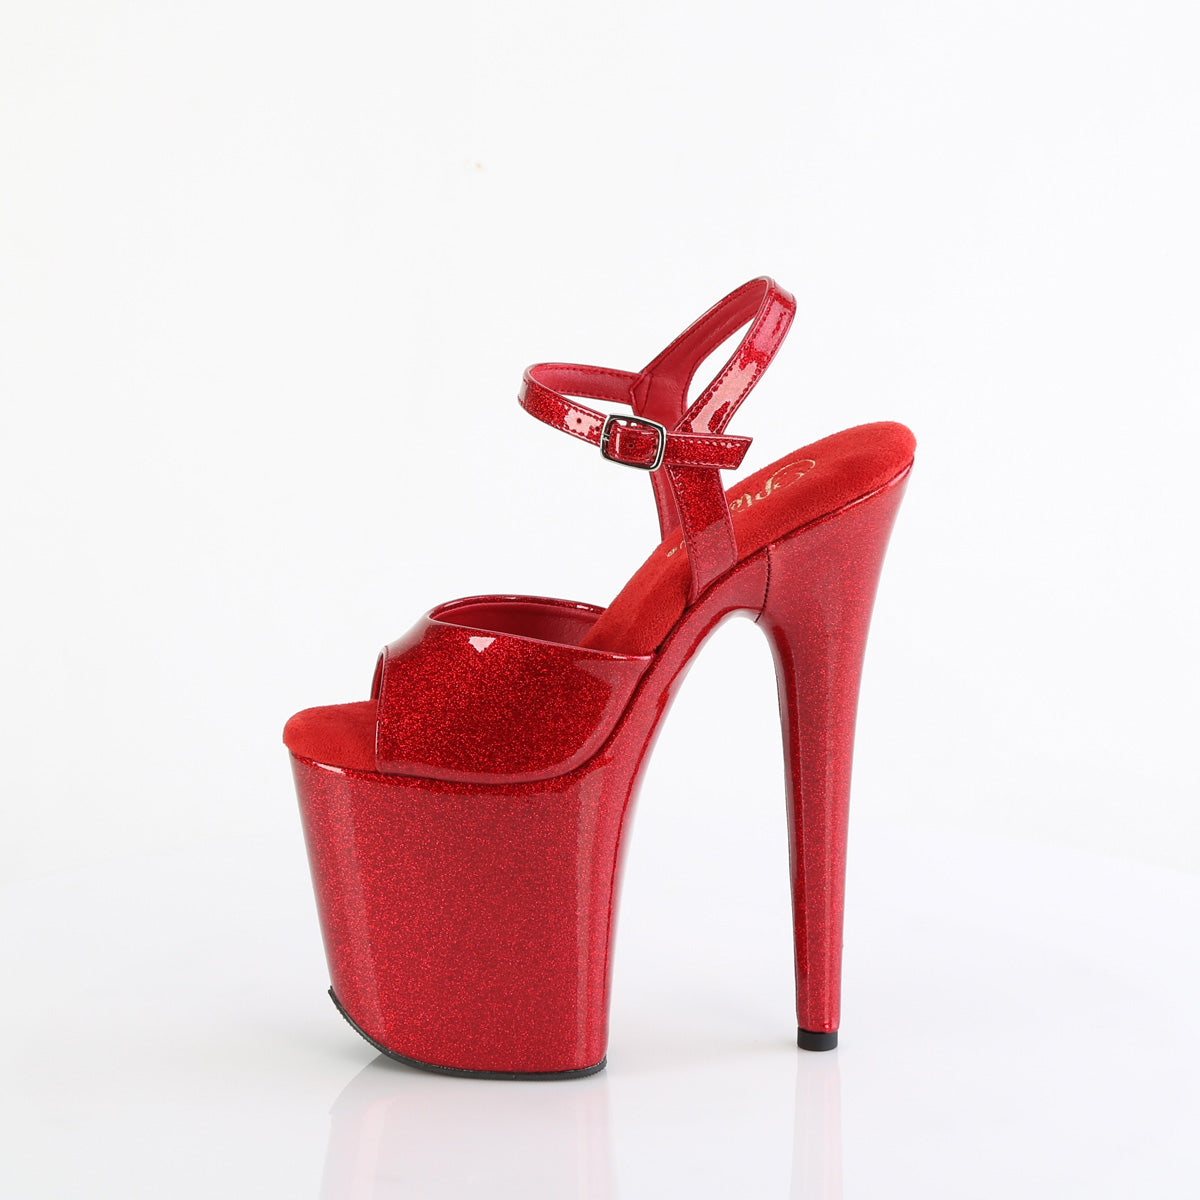 FLAMINGO-809GP Pleaser Ruby Red Glitter Patent Platform Shoes [Exotic Dancing Shoes]